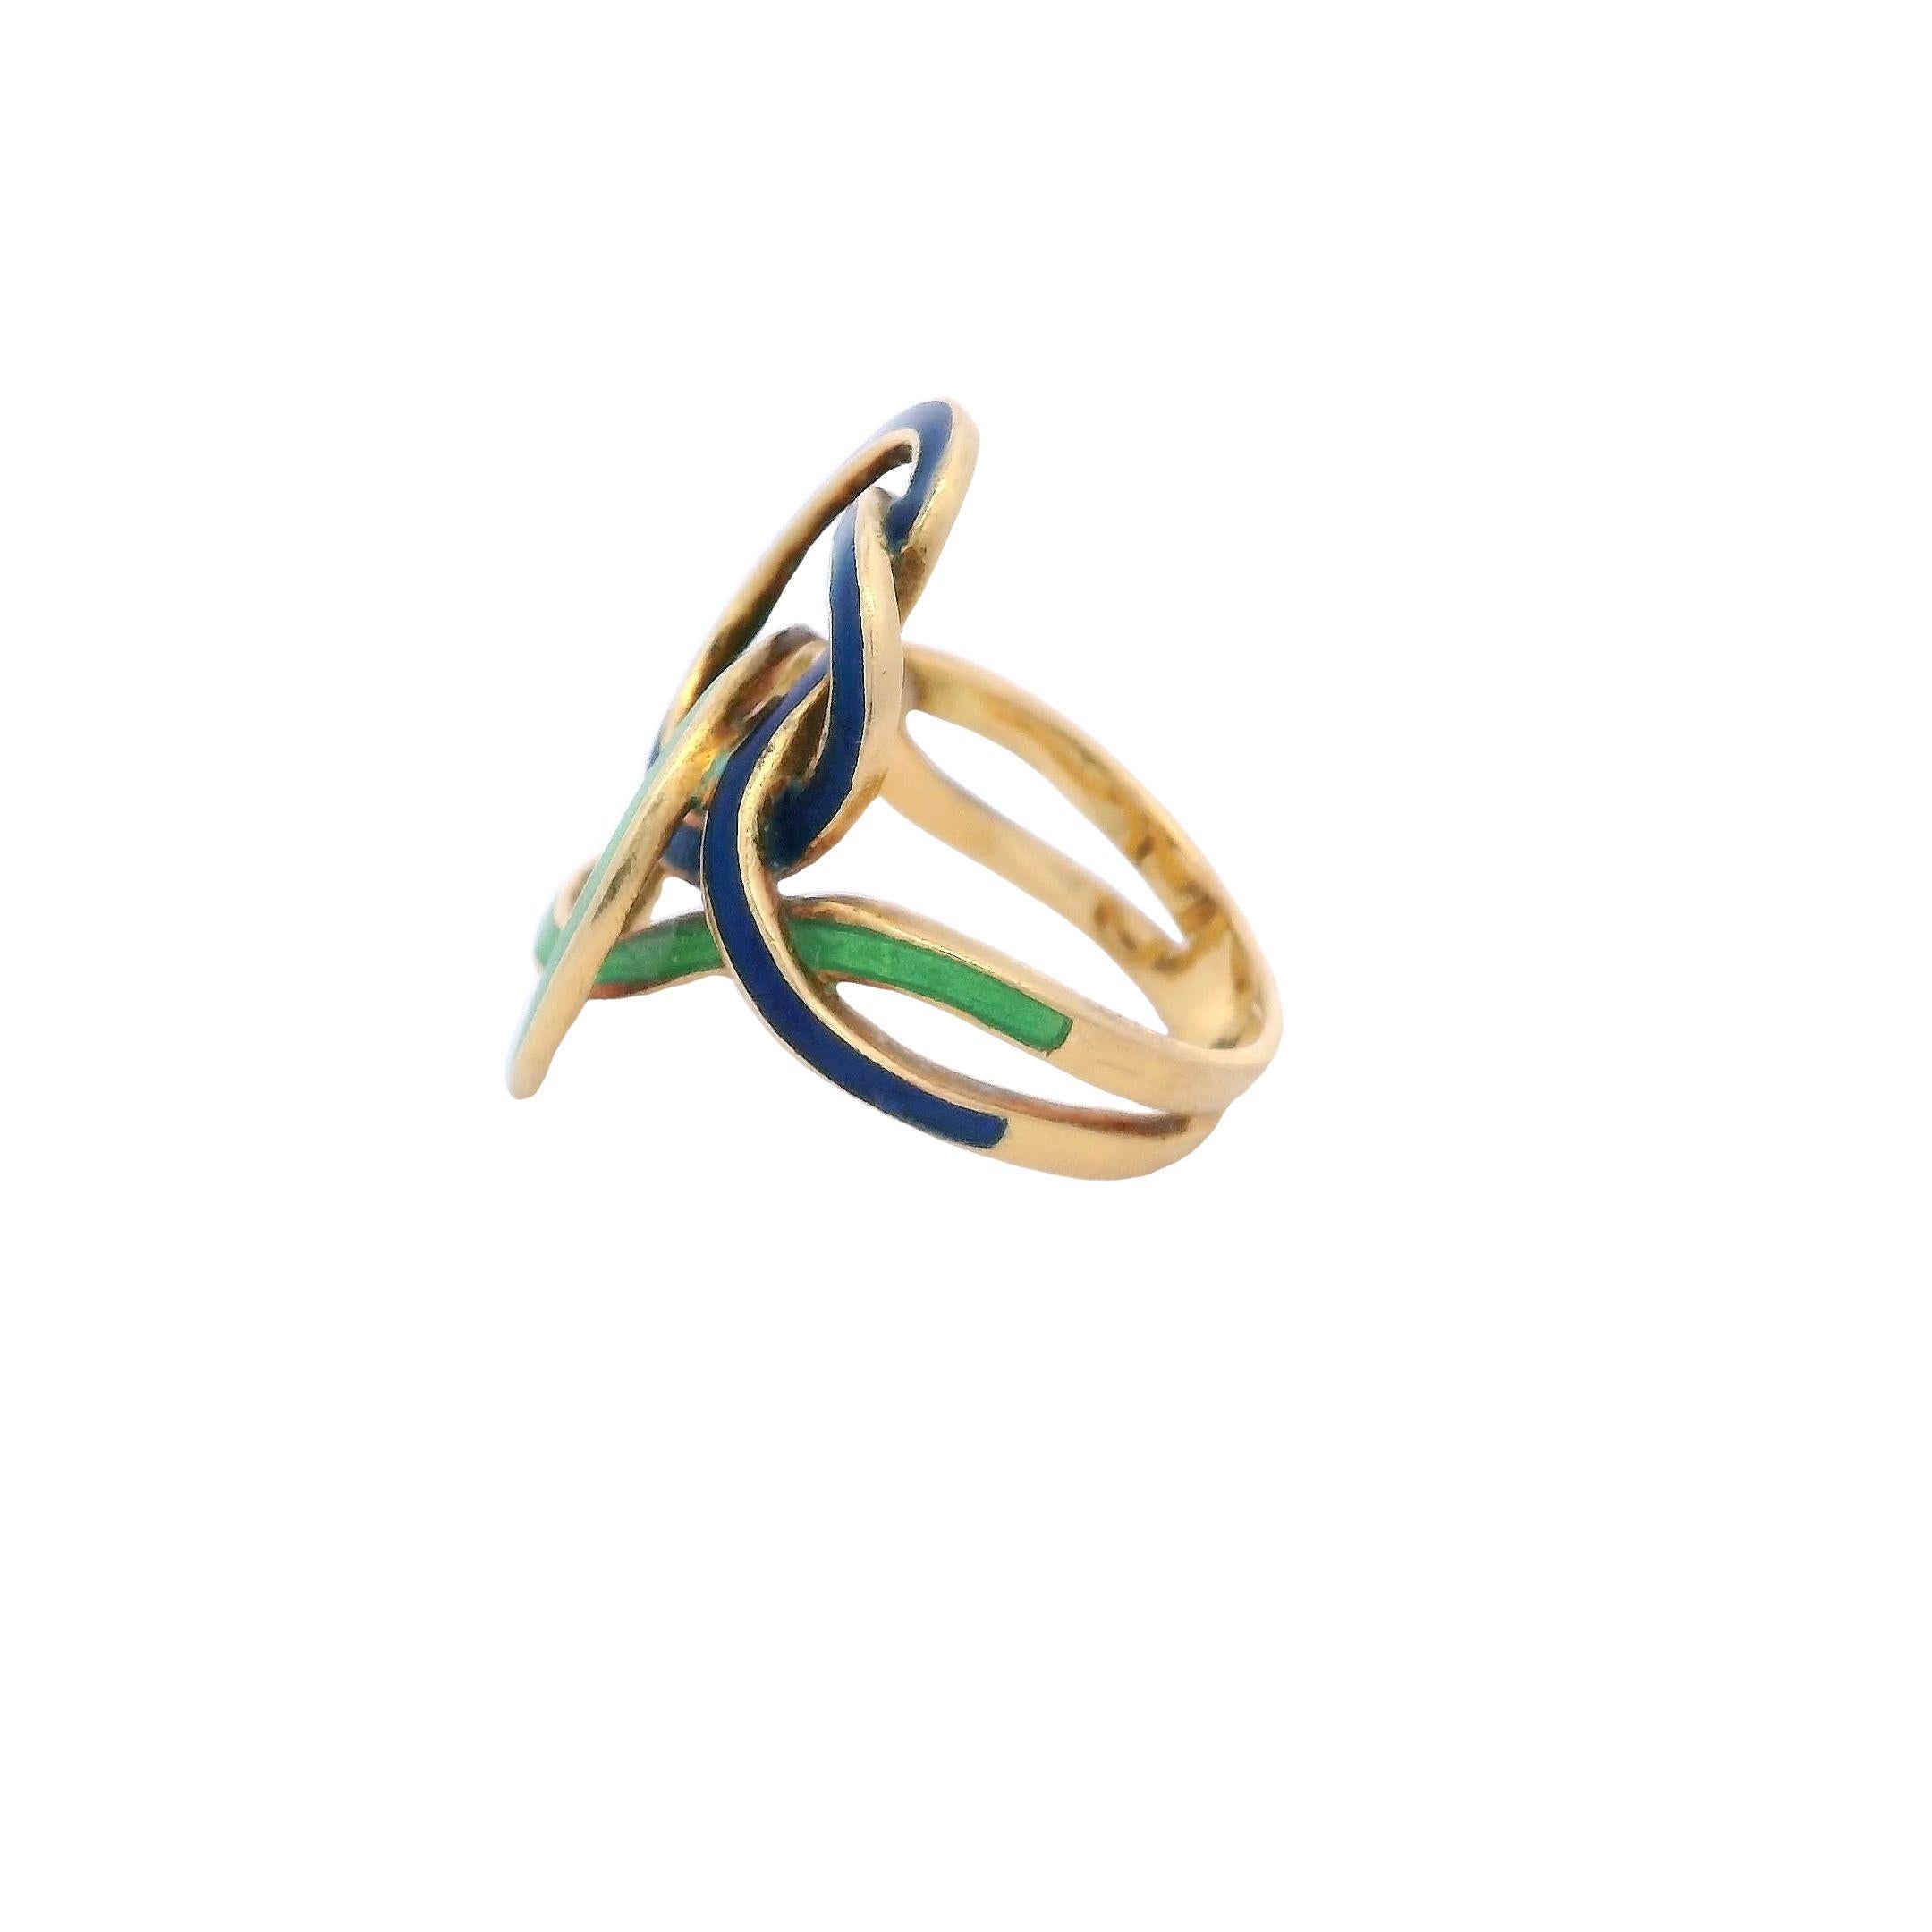 Antique 14 Karat Yellow Gold Guilloché Green and Blue Enamel Ring In Good Condition For Sale In Fairfield, CT